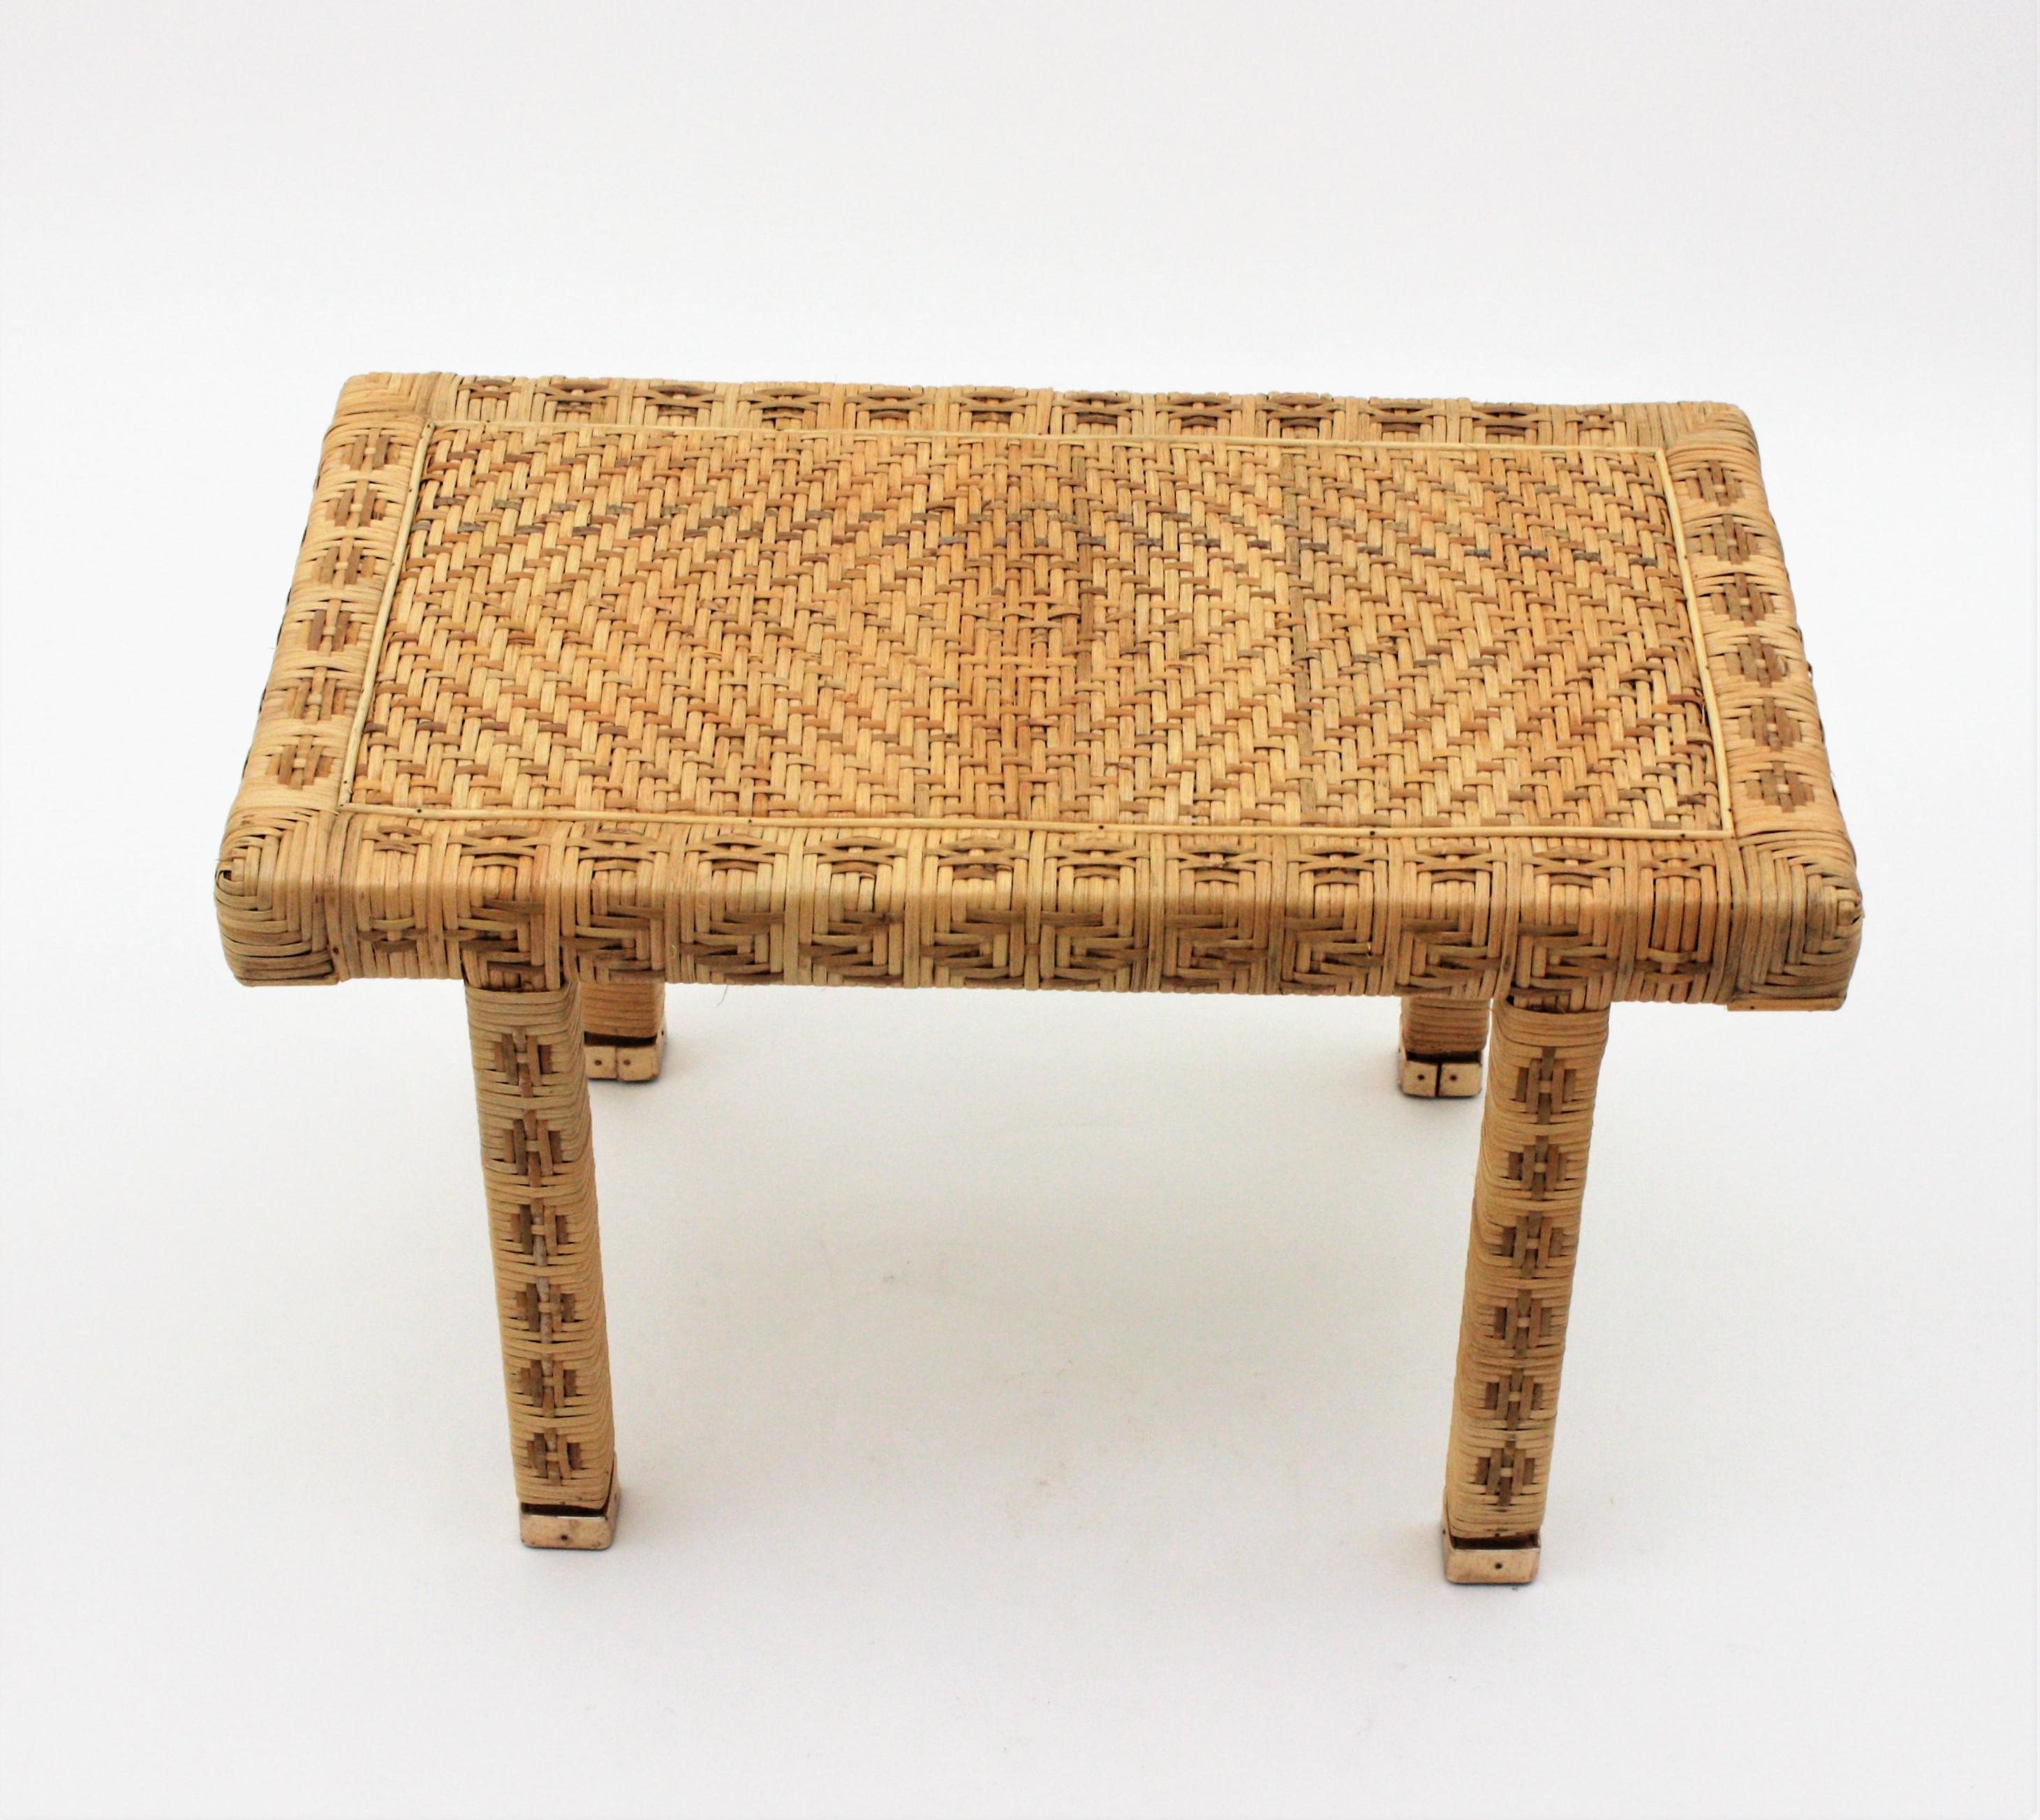 20th Century Hand Woven Wicker Rattan Stool or Side Table,  Spain, 1960s